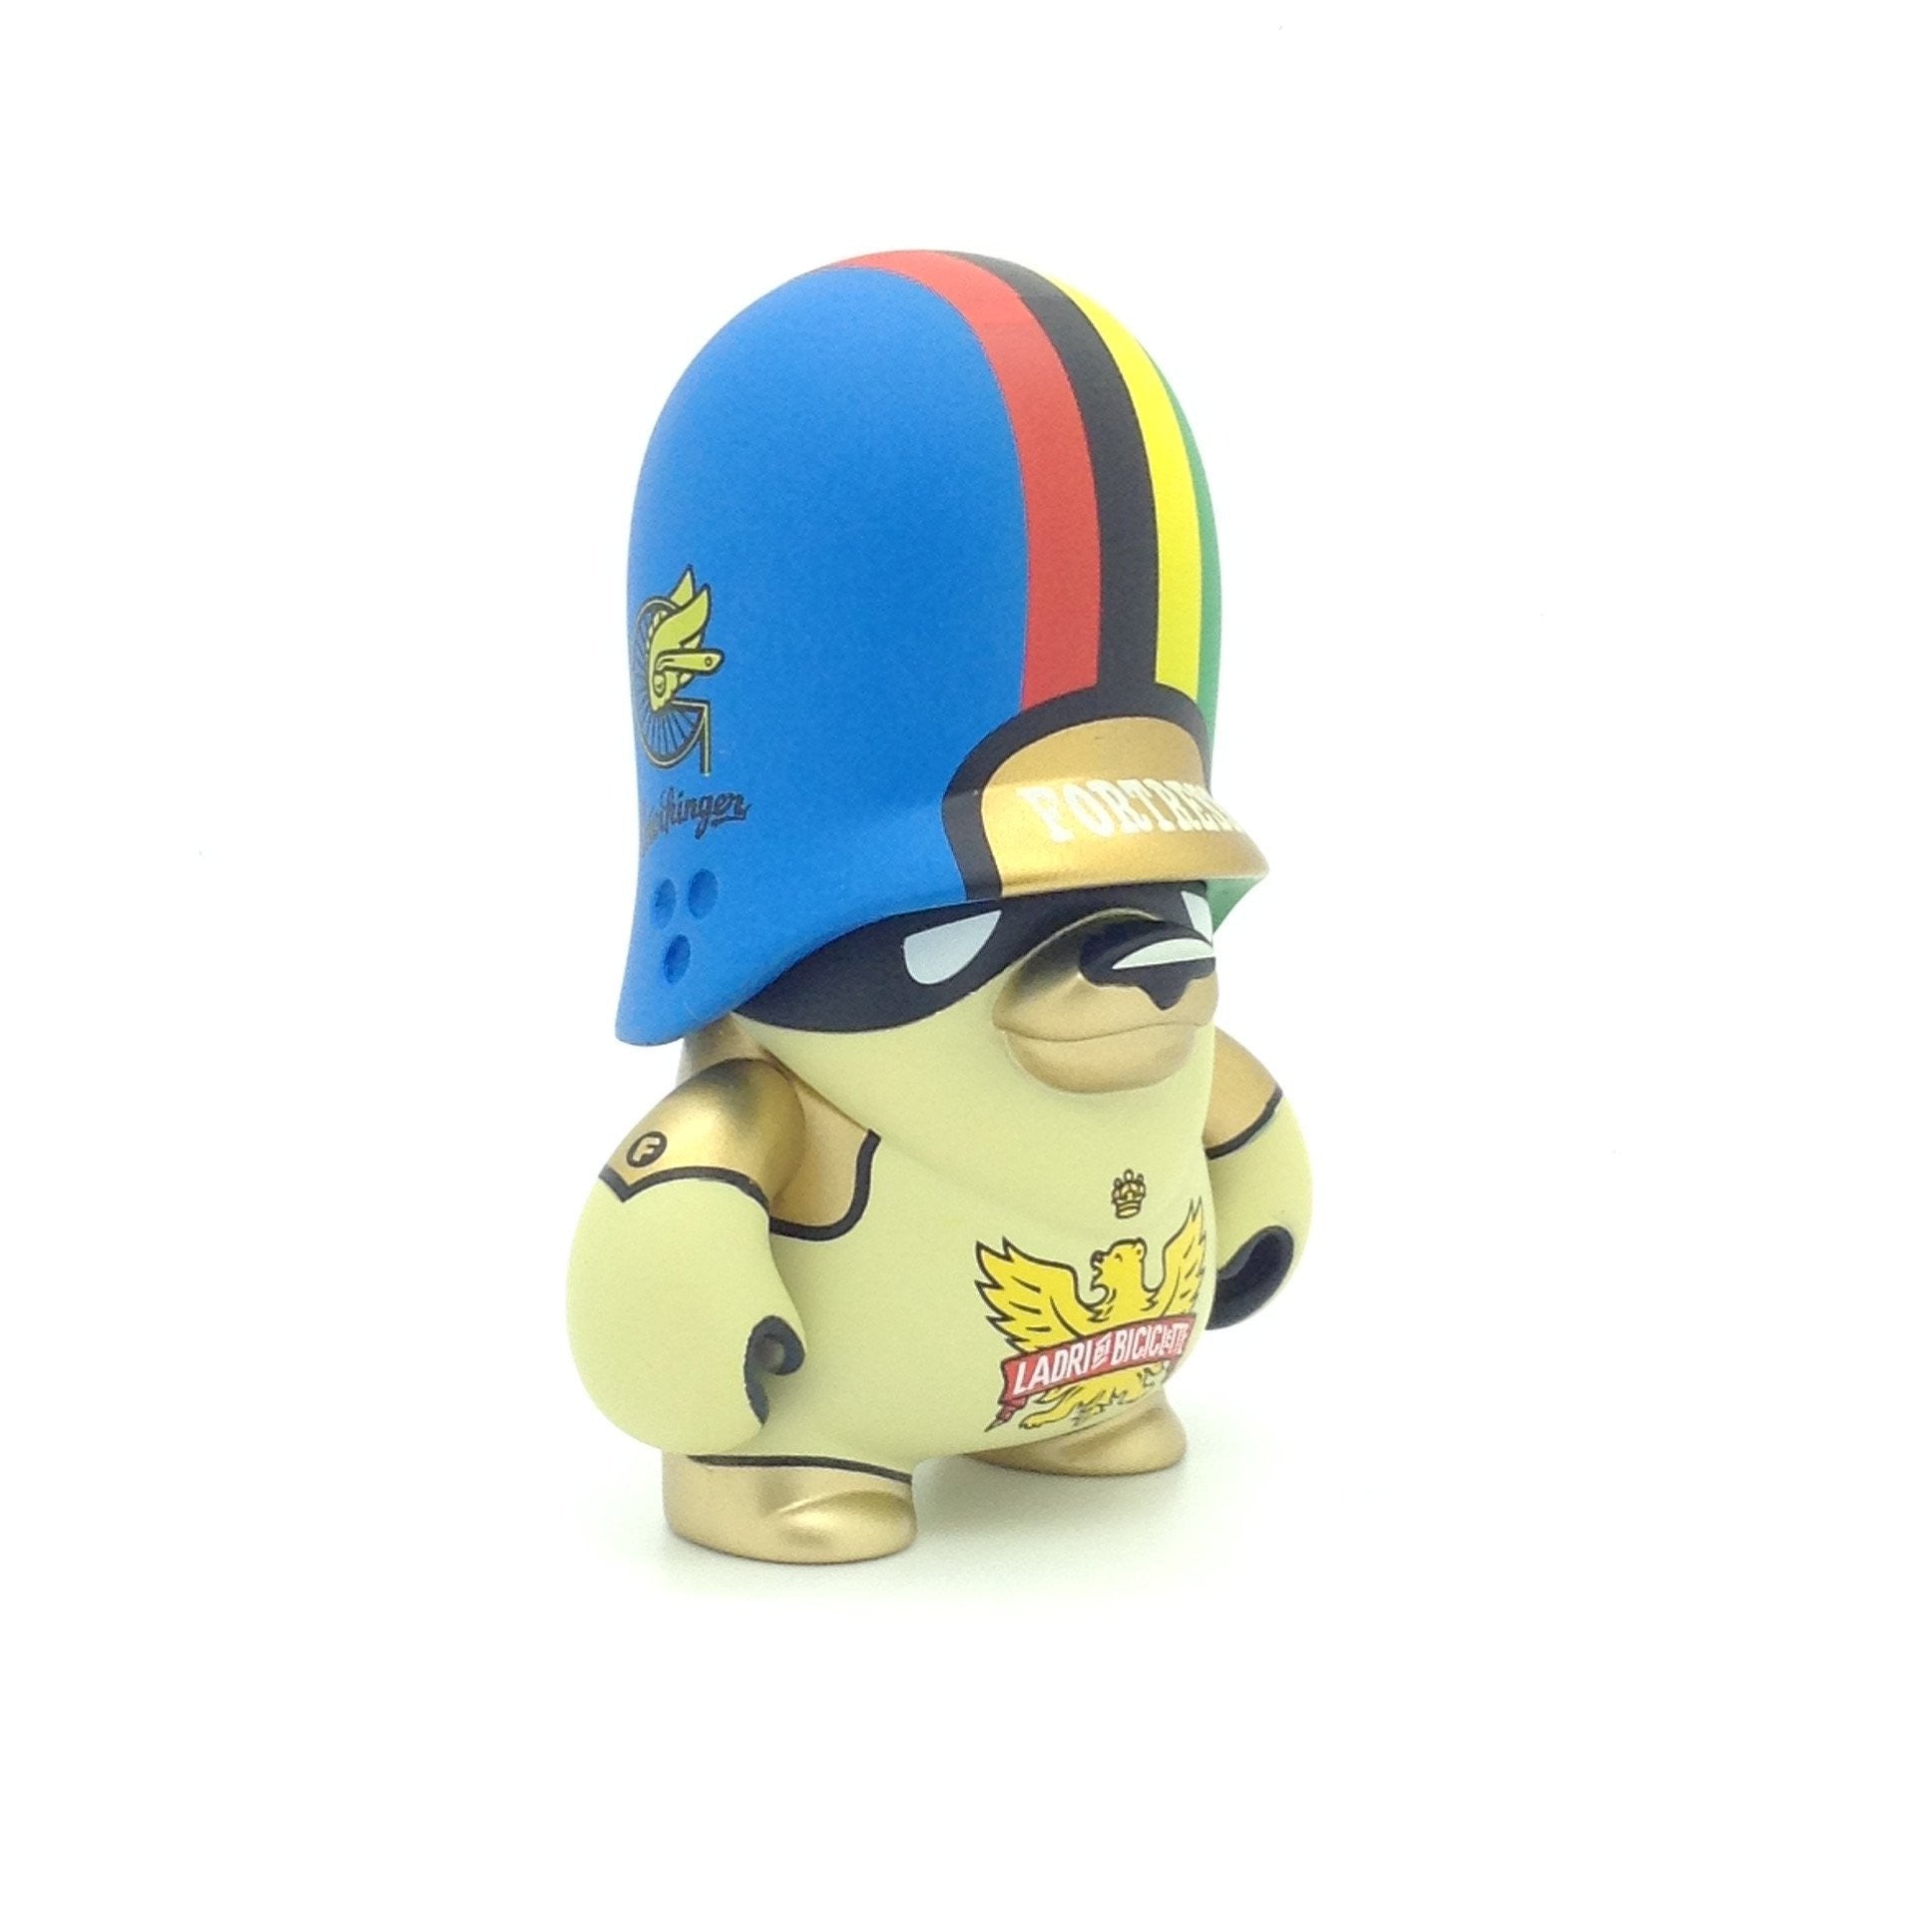 Teddy Troops 2.0 Series 1 -  Ladri Di Bicicletta Gold/Yellow by Flying Fortress